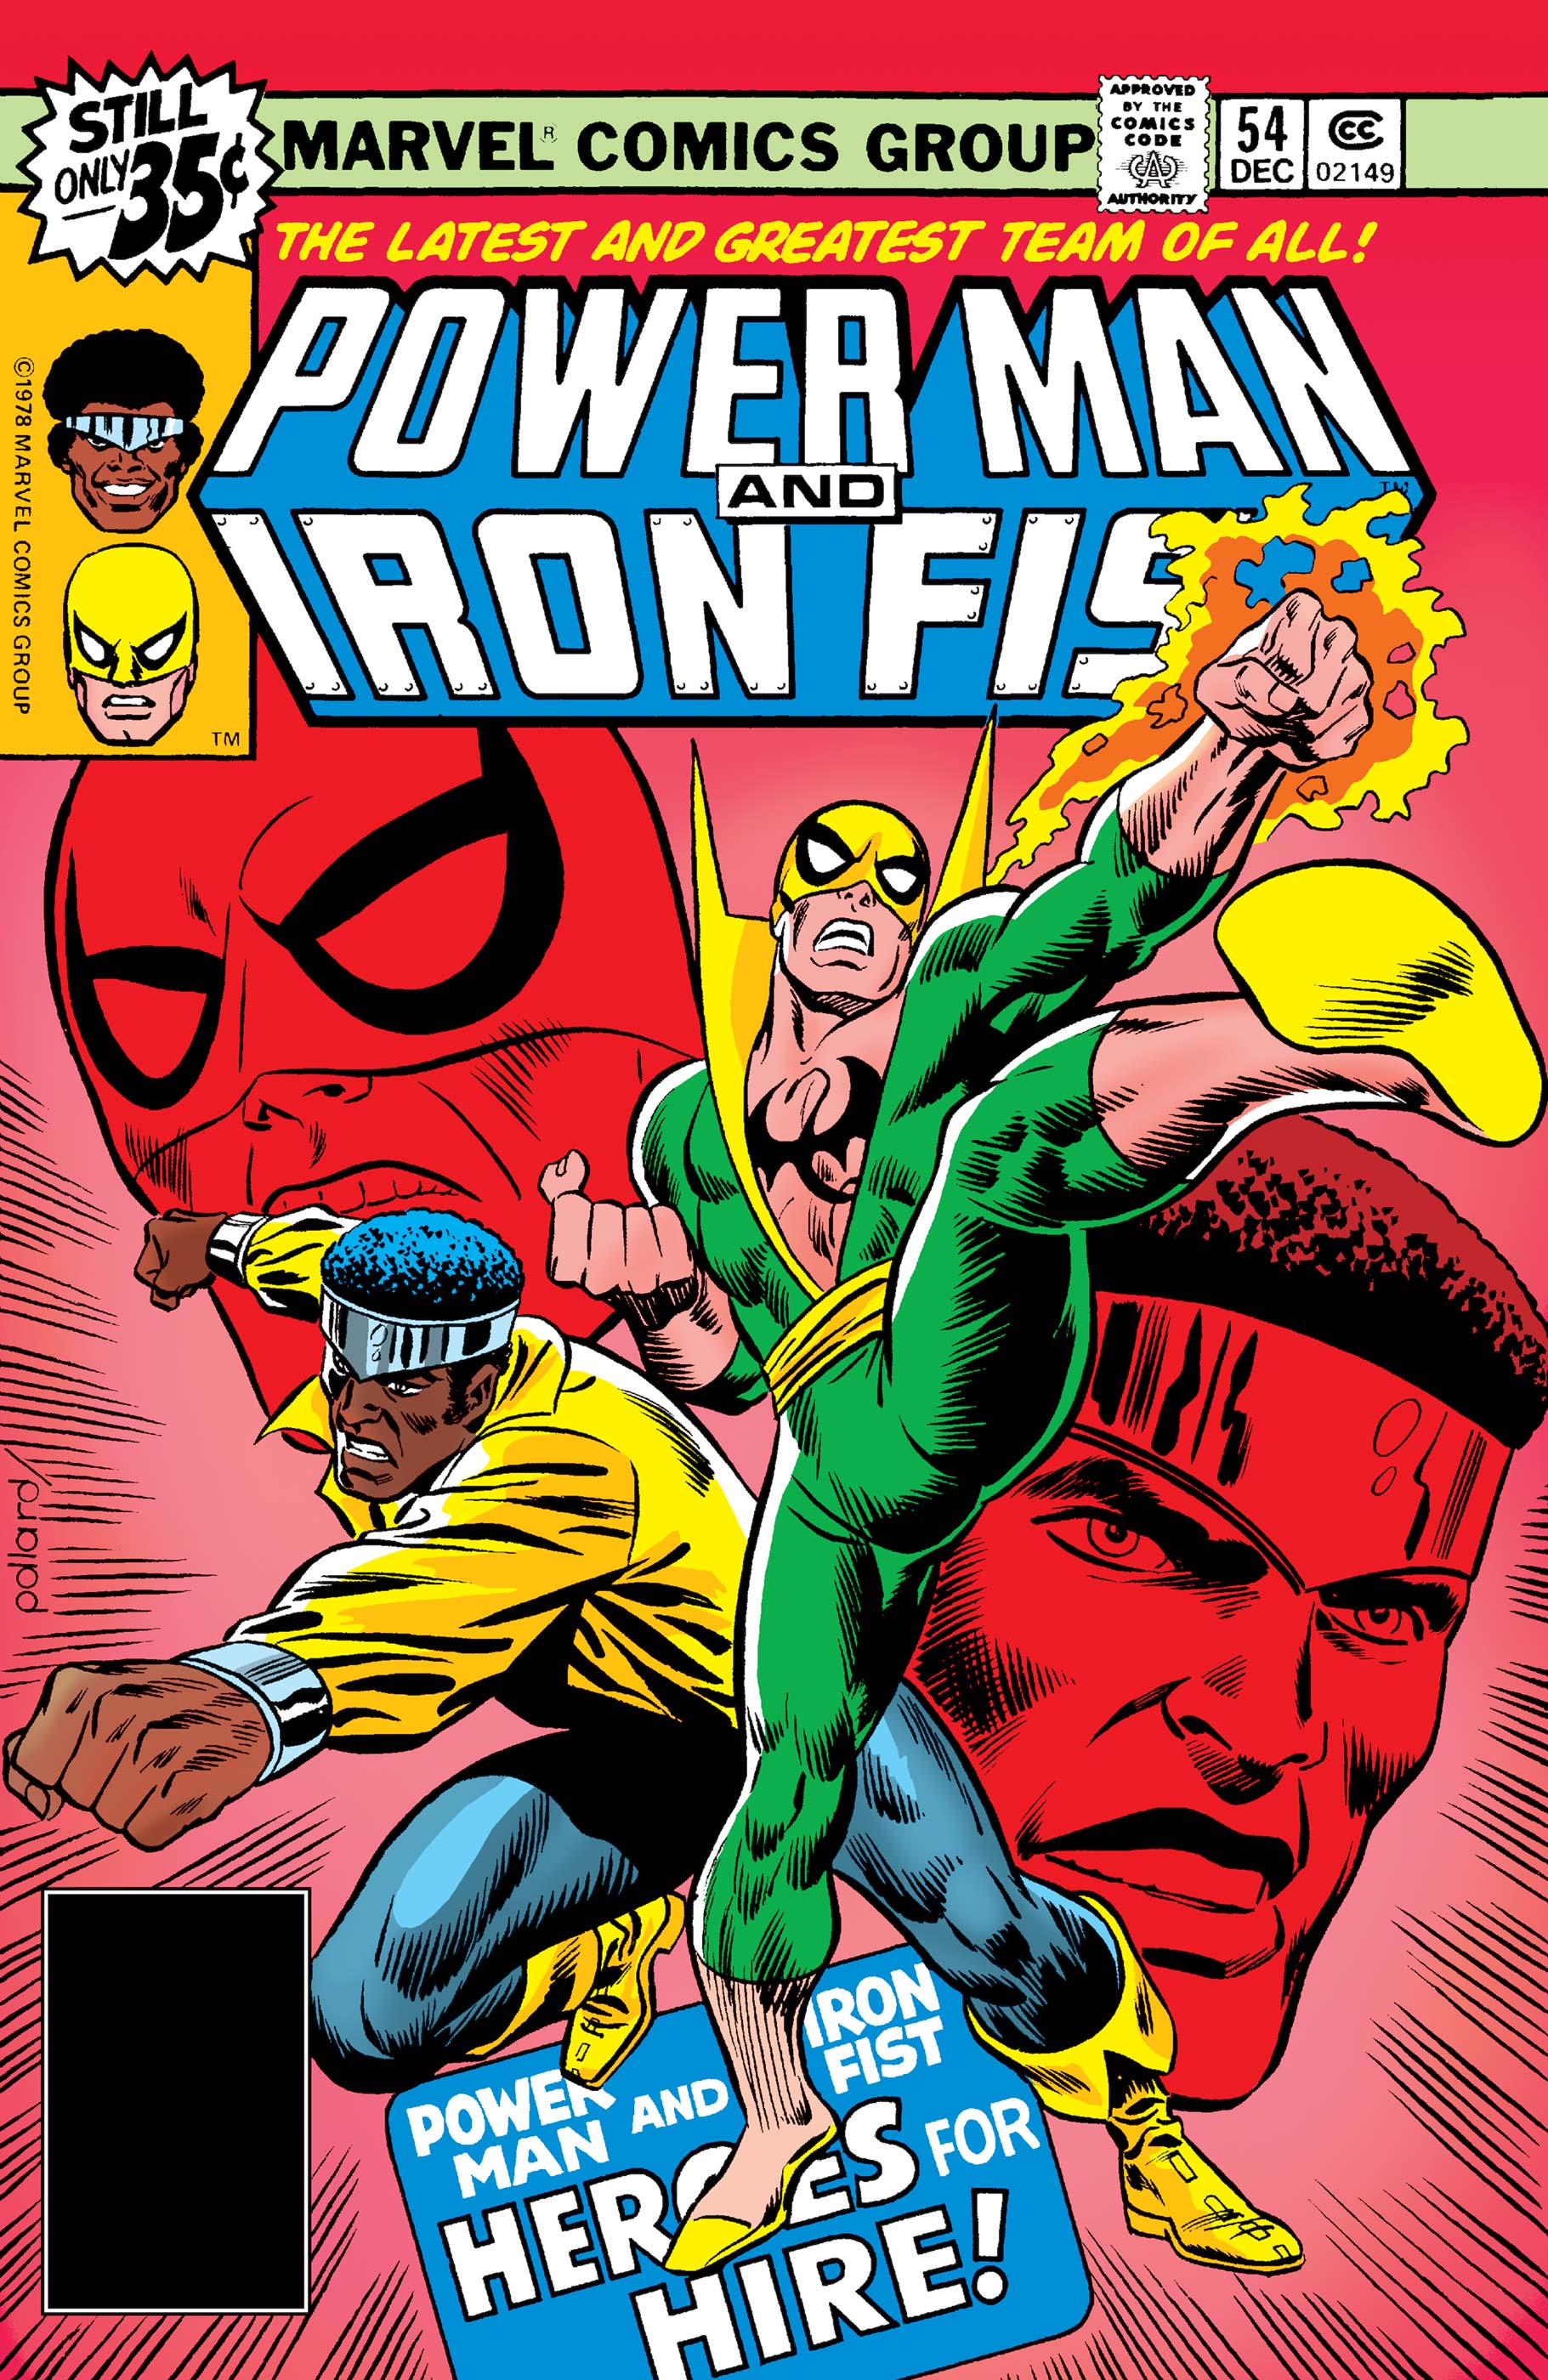 Power Man and Iron Fist (1978) #54